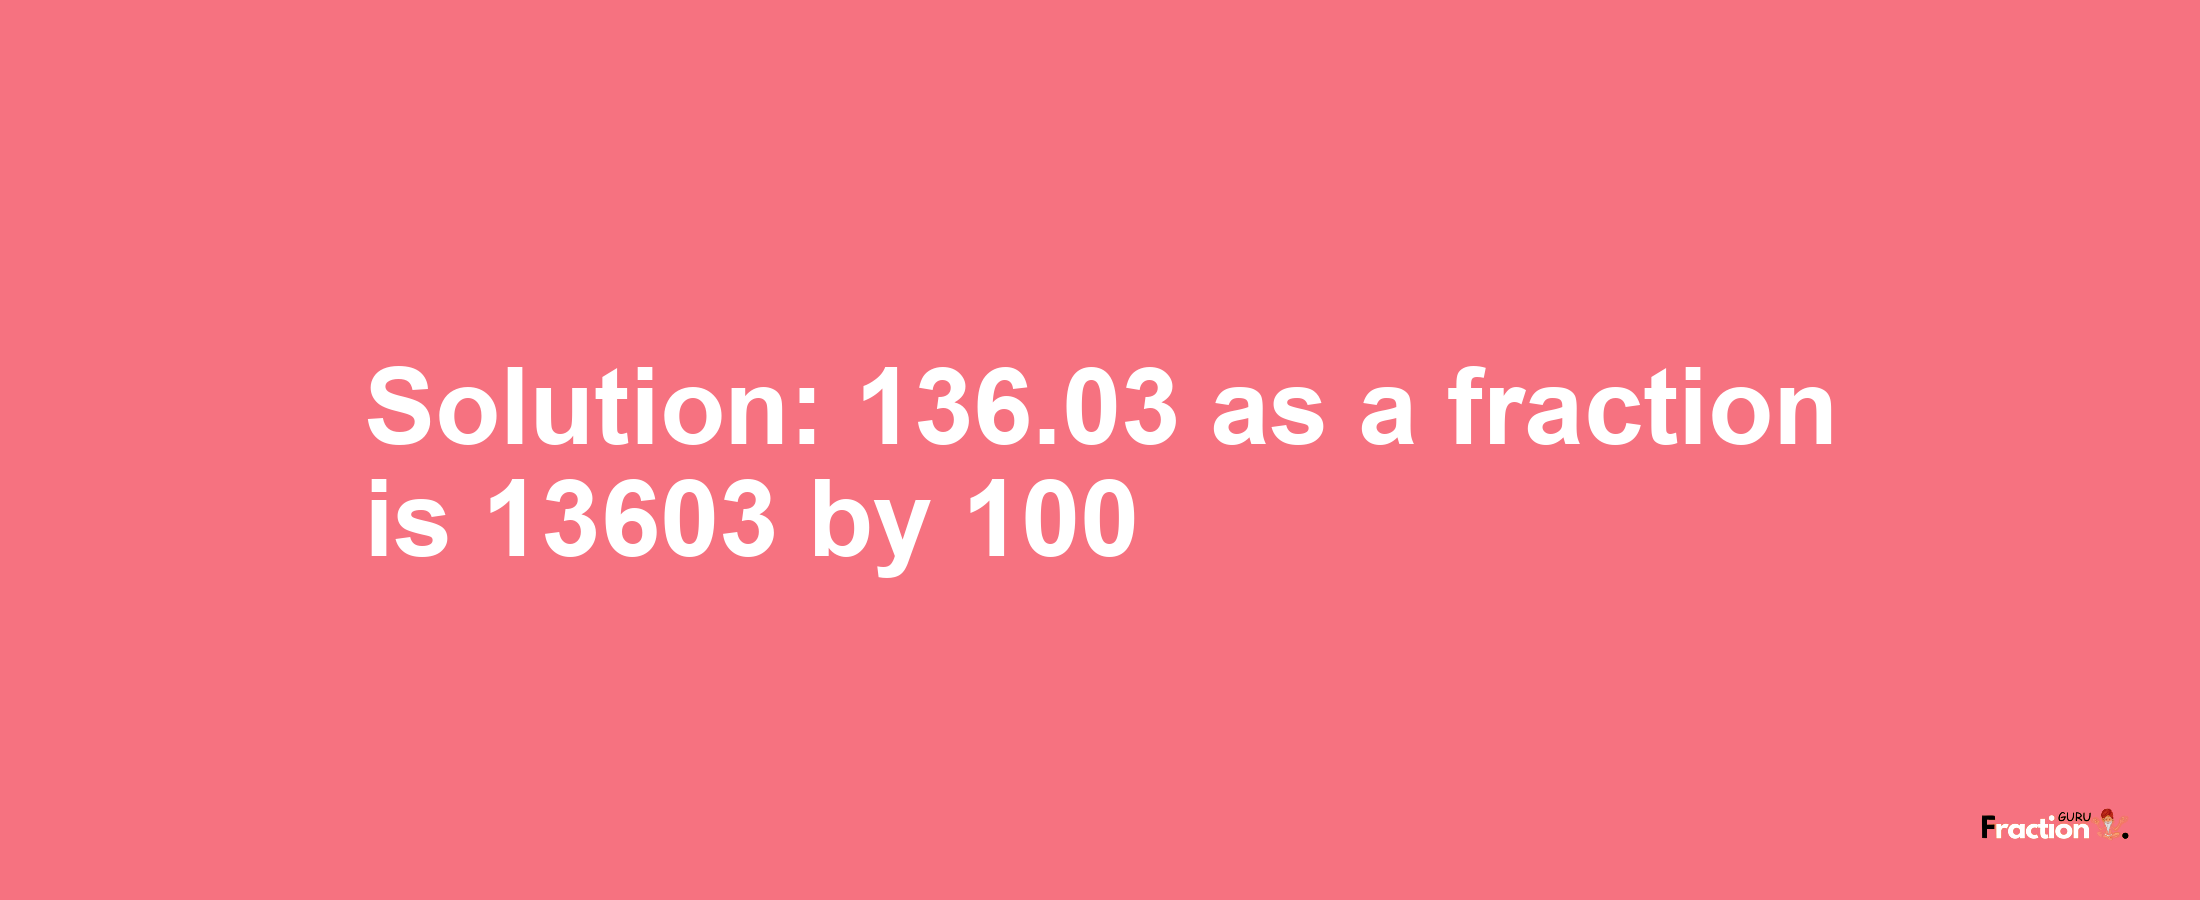 Solution:136.03 as a fraction is 13603/100